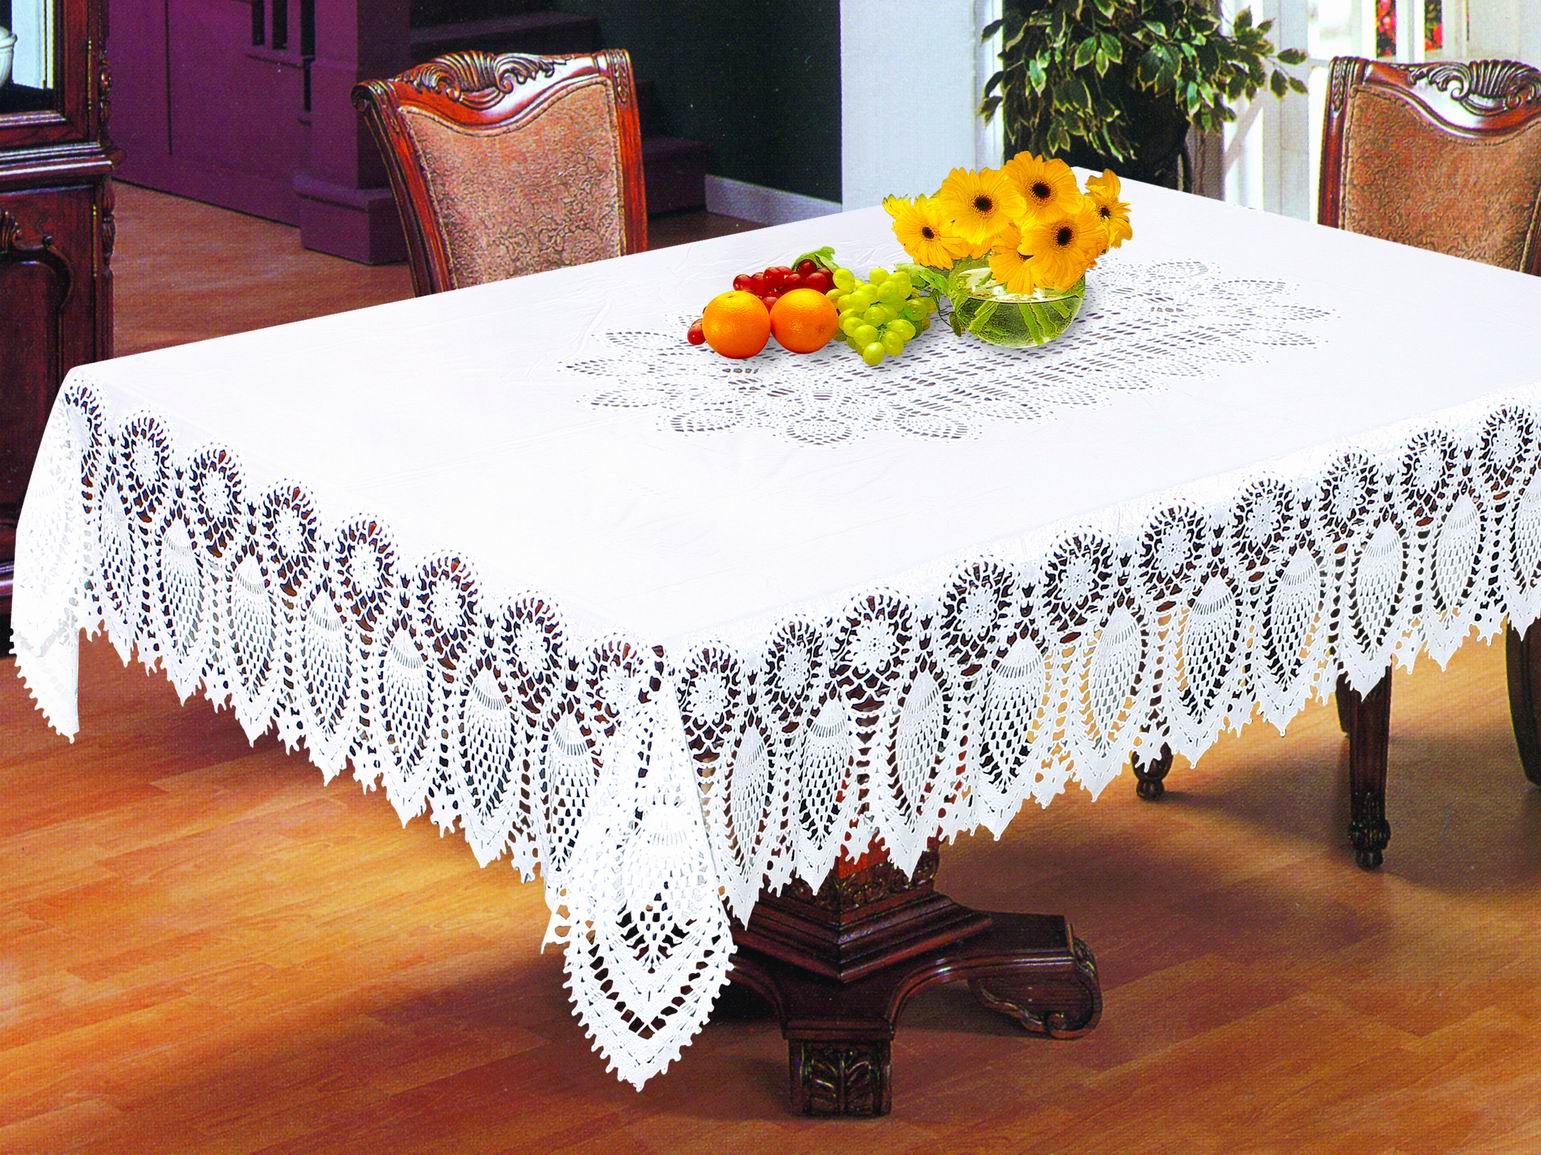 China crocheted pvc table cloth on sale